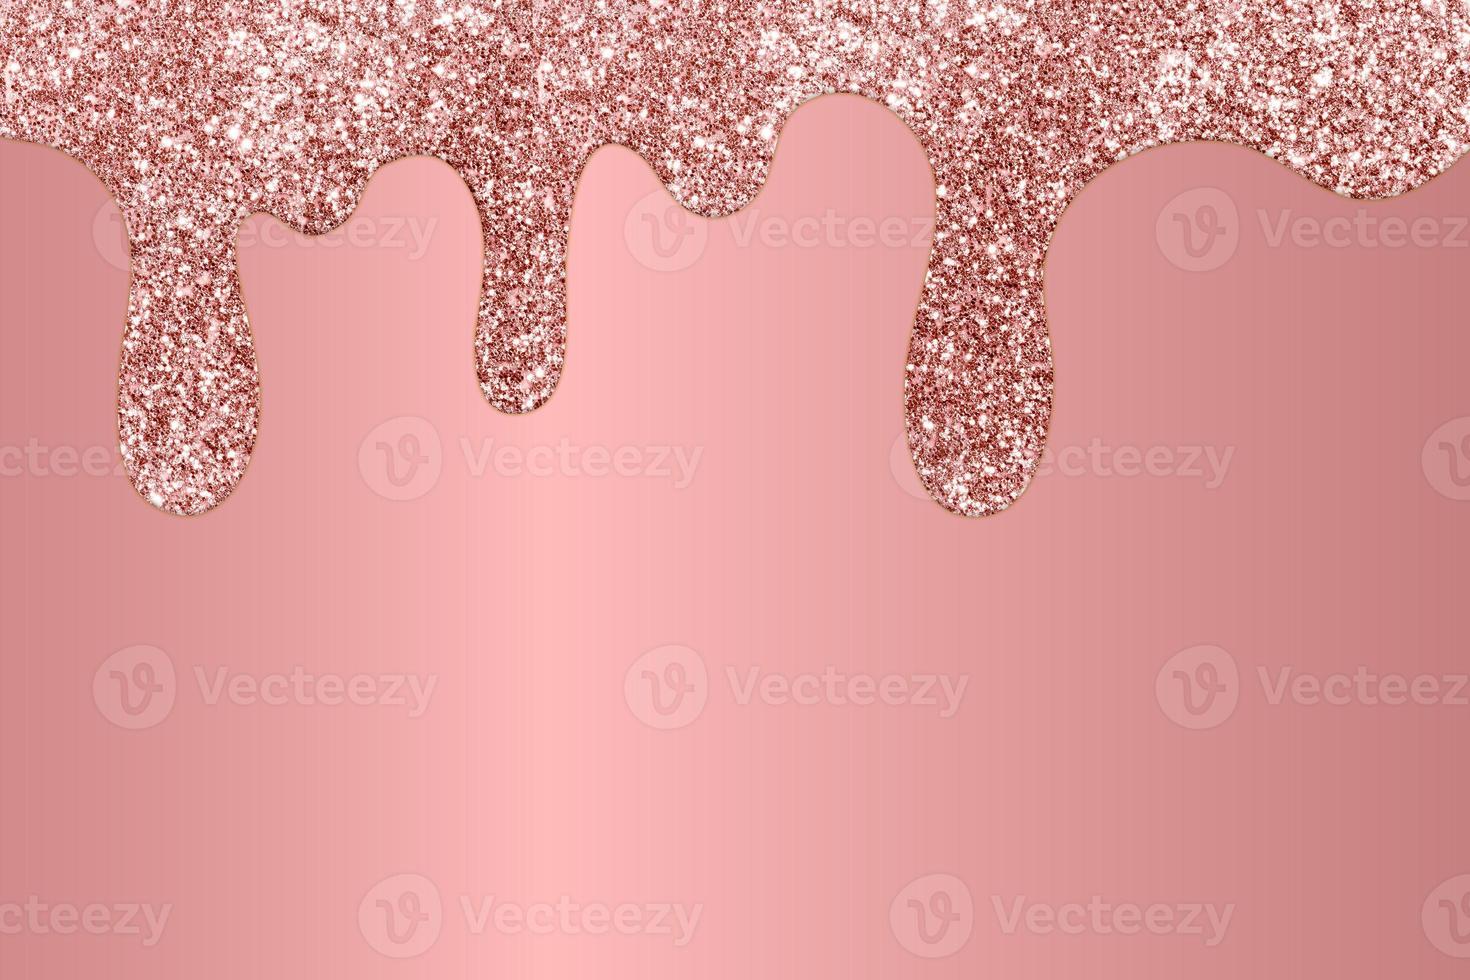 Rose Gold dripping glitter background, Dripping Glitter Background photo